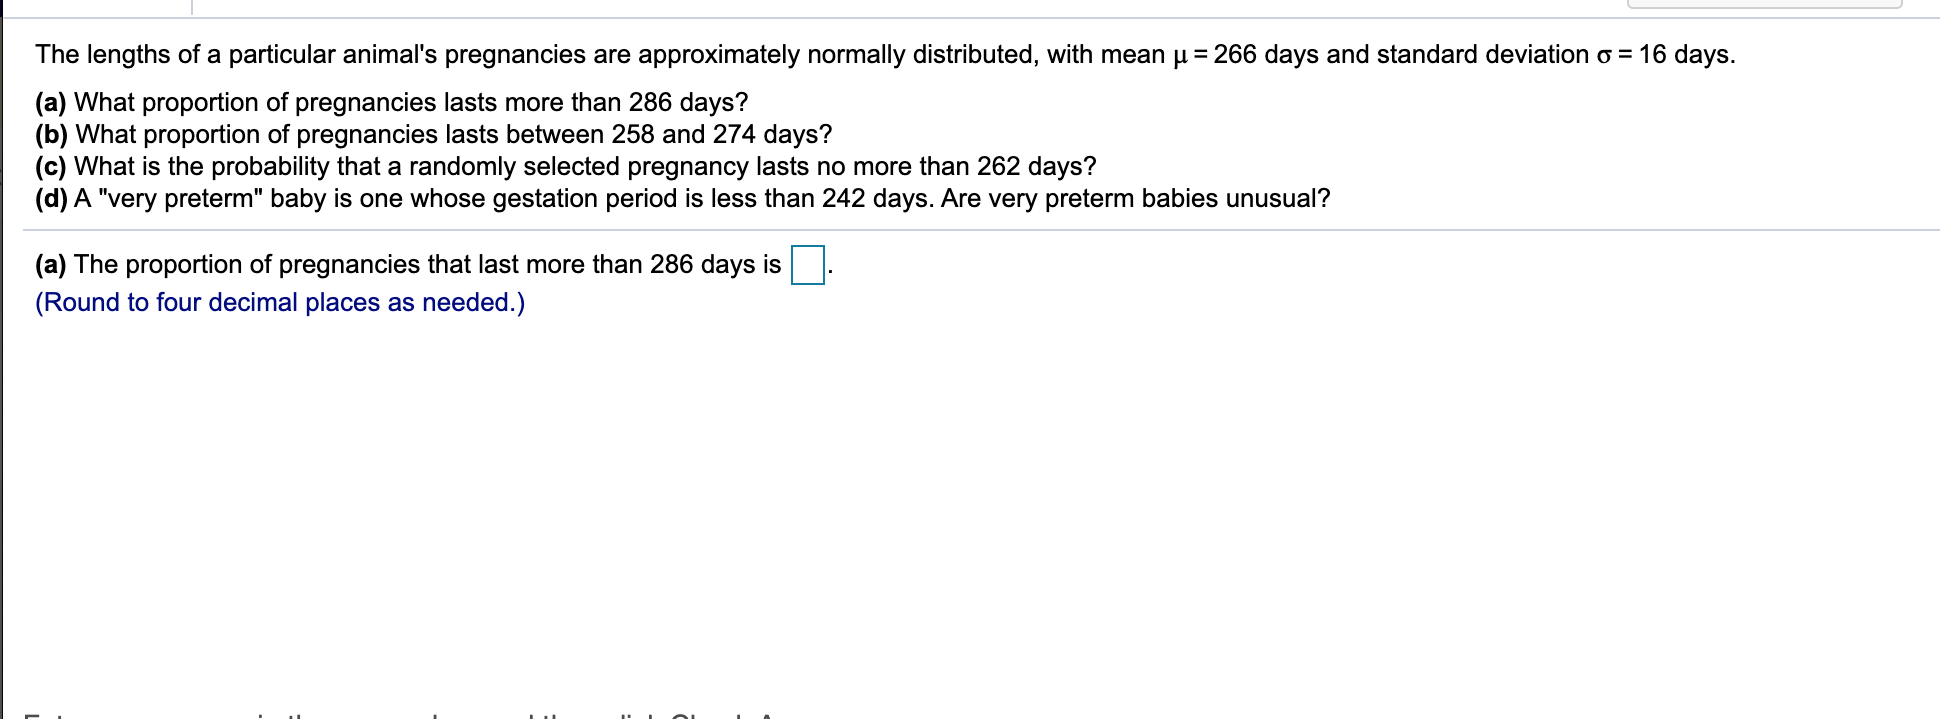 The lengths of a particular animal's pregnancies are approximately normally distributed, with mean p = 266 days and standard deviation o = 16 days.
(a) What proportion of pregnancies lasts more than 286 days?
(b) What proportion of pregnancies lasts between 258 and 274 days?
(c) What is the probability that a randomly selected pregnancy lasts no more than 262 days?
(d) A "very preterm" baby is one whose gestation period is less than 242 days. Are very preterm babies unusual?
(a) The proportion of pregnancies that last more than 286 days is
(Round to four decimal places as needed.)
